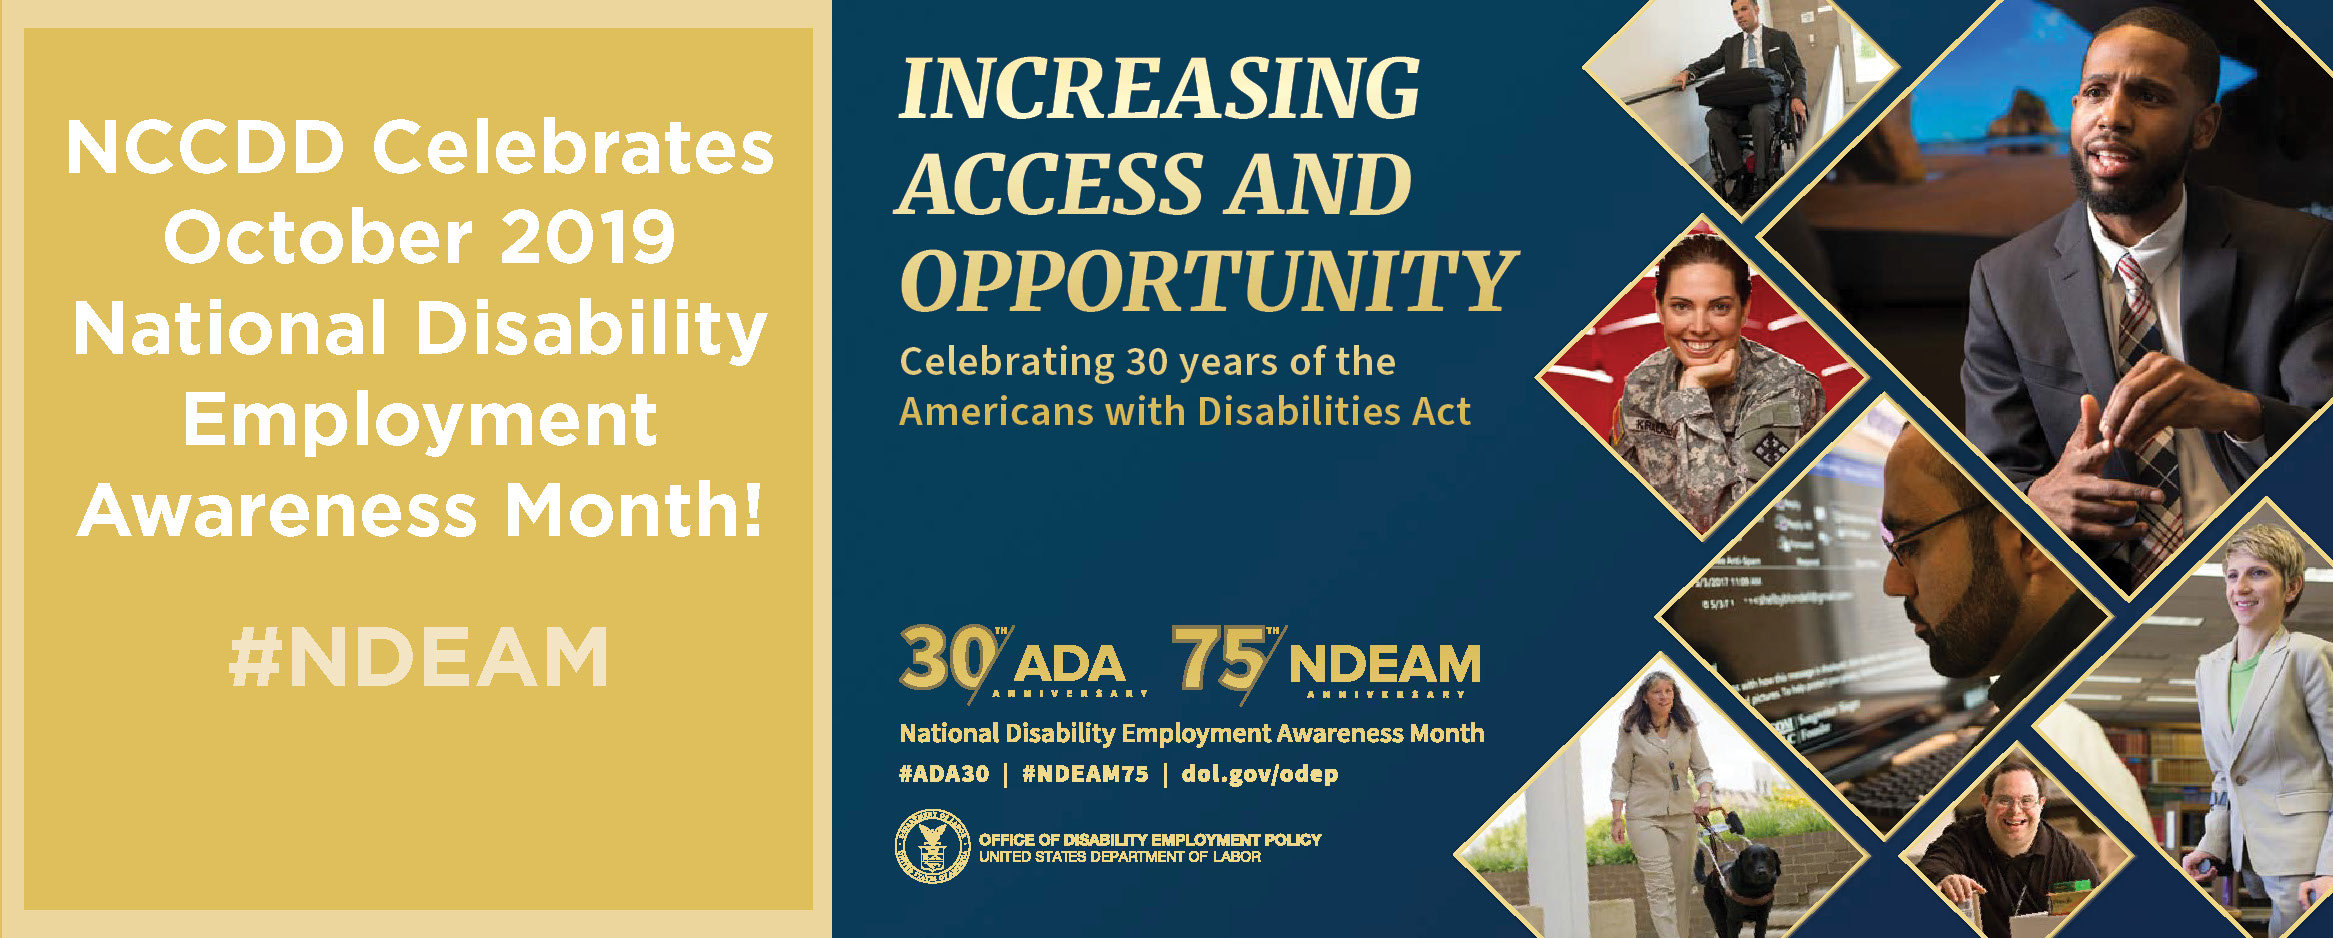 NCCDD celebrates National Disability Employment Awareness Month in October